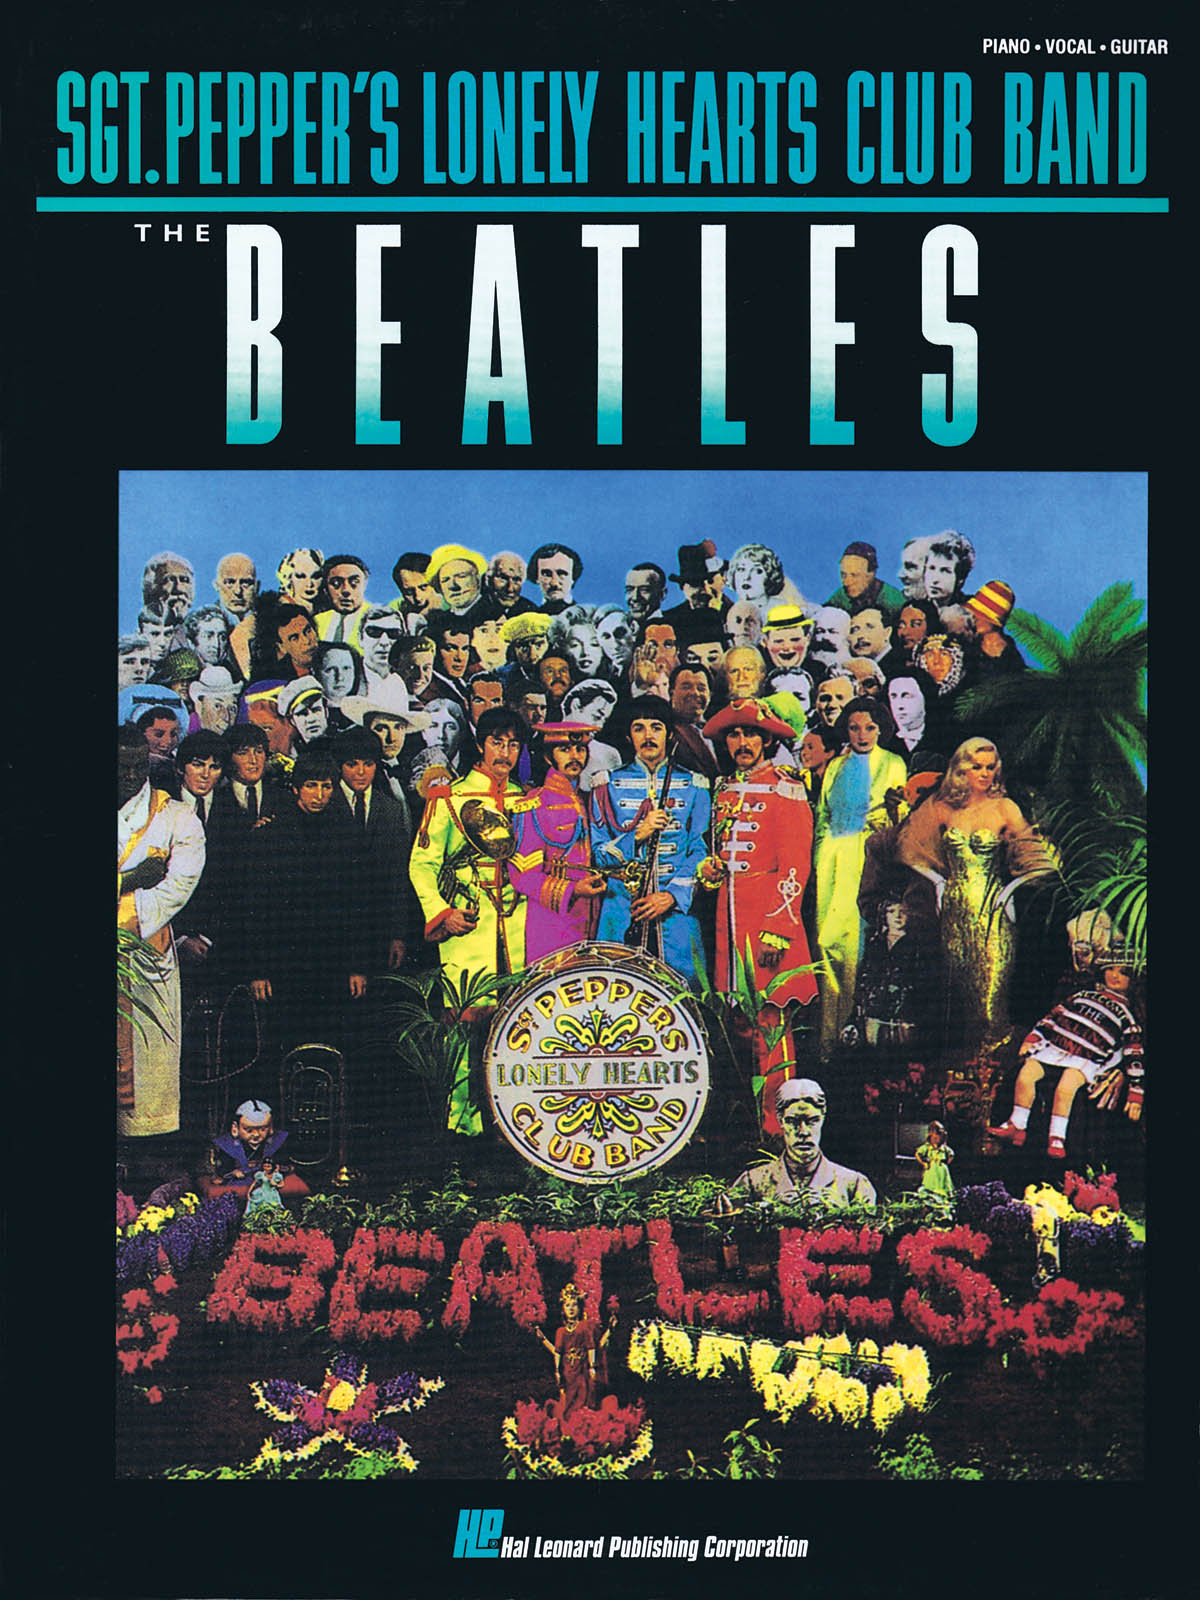 The Beatles - SGT. PEPPER´S LONELY HEART